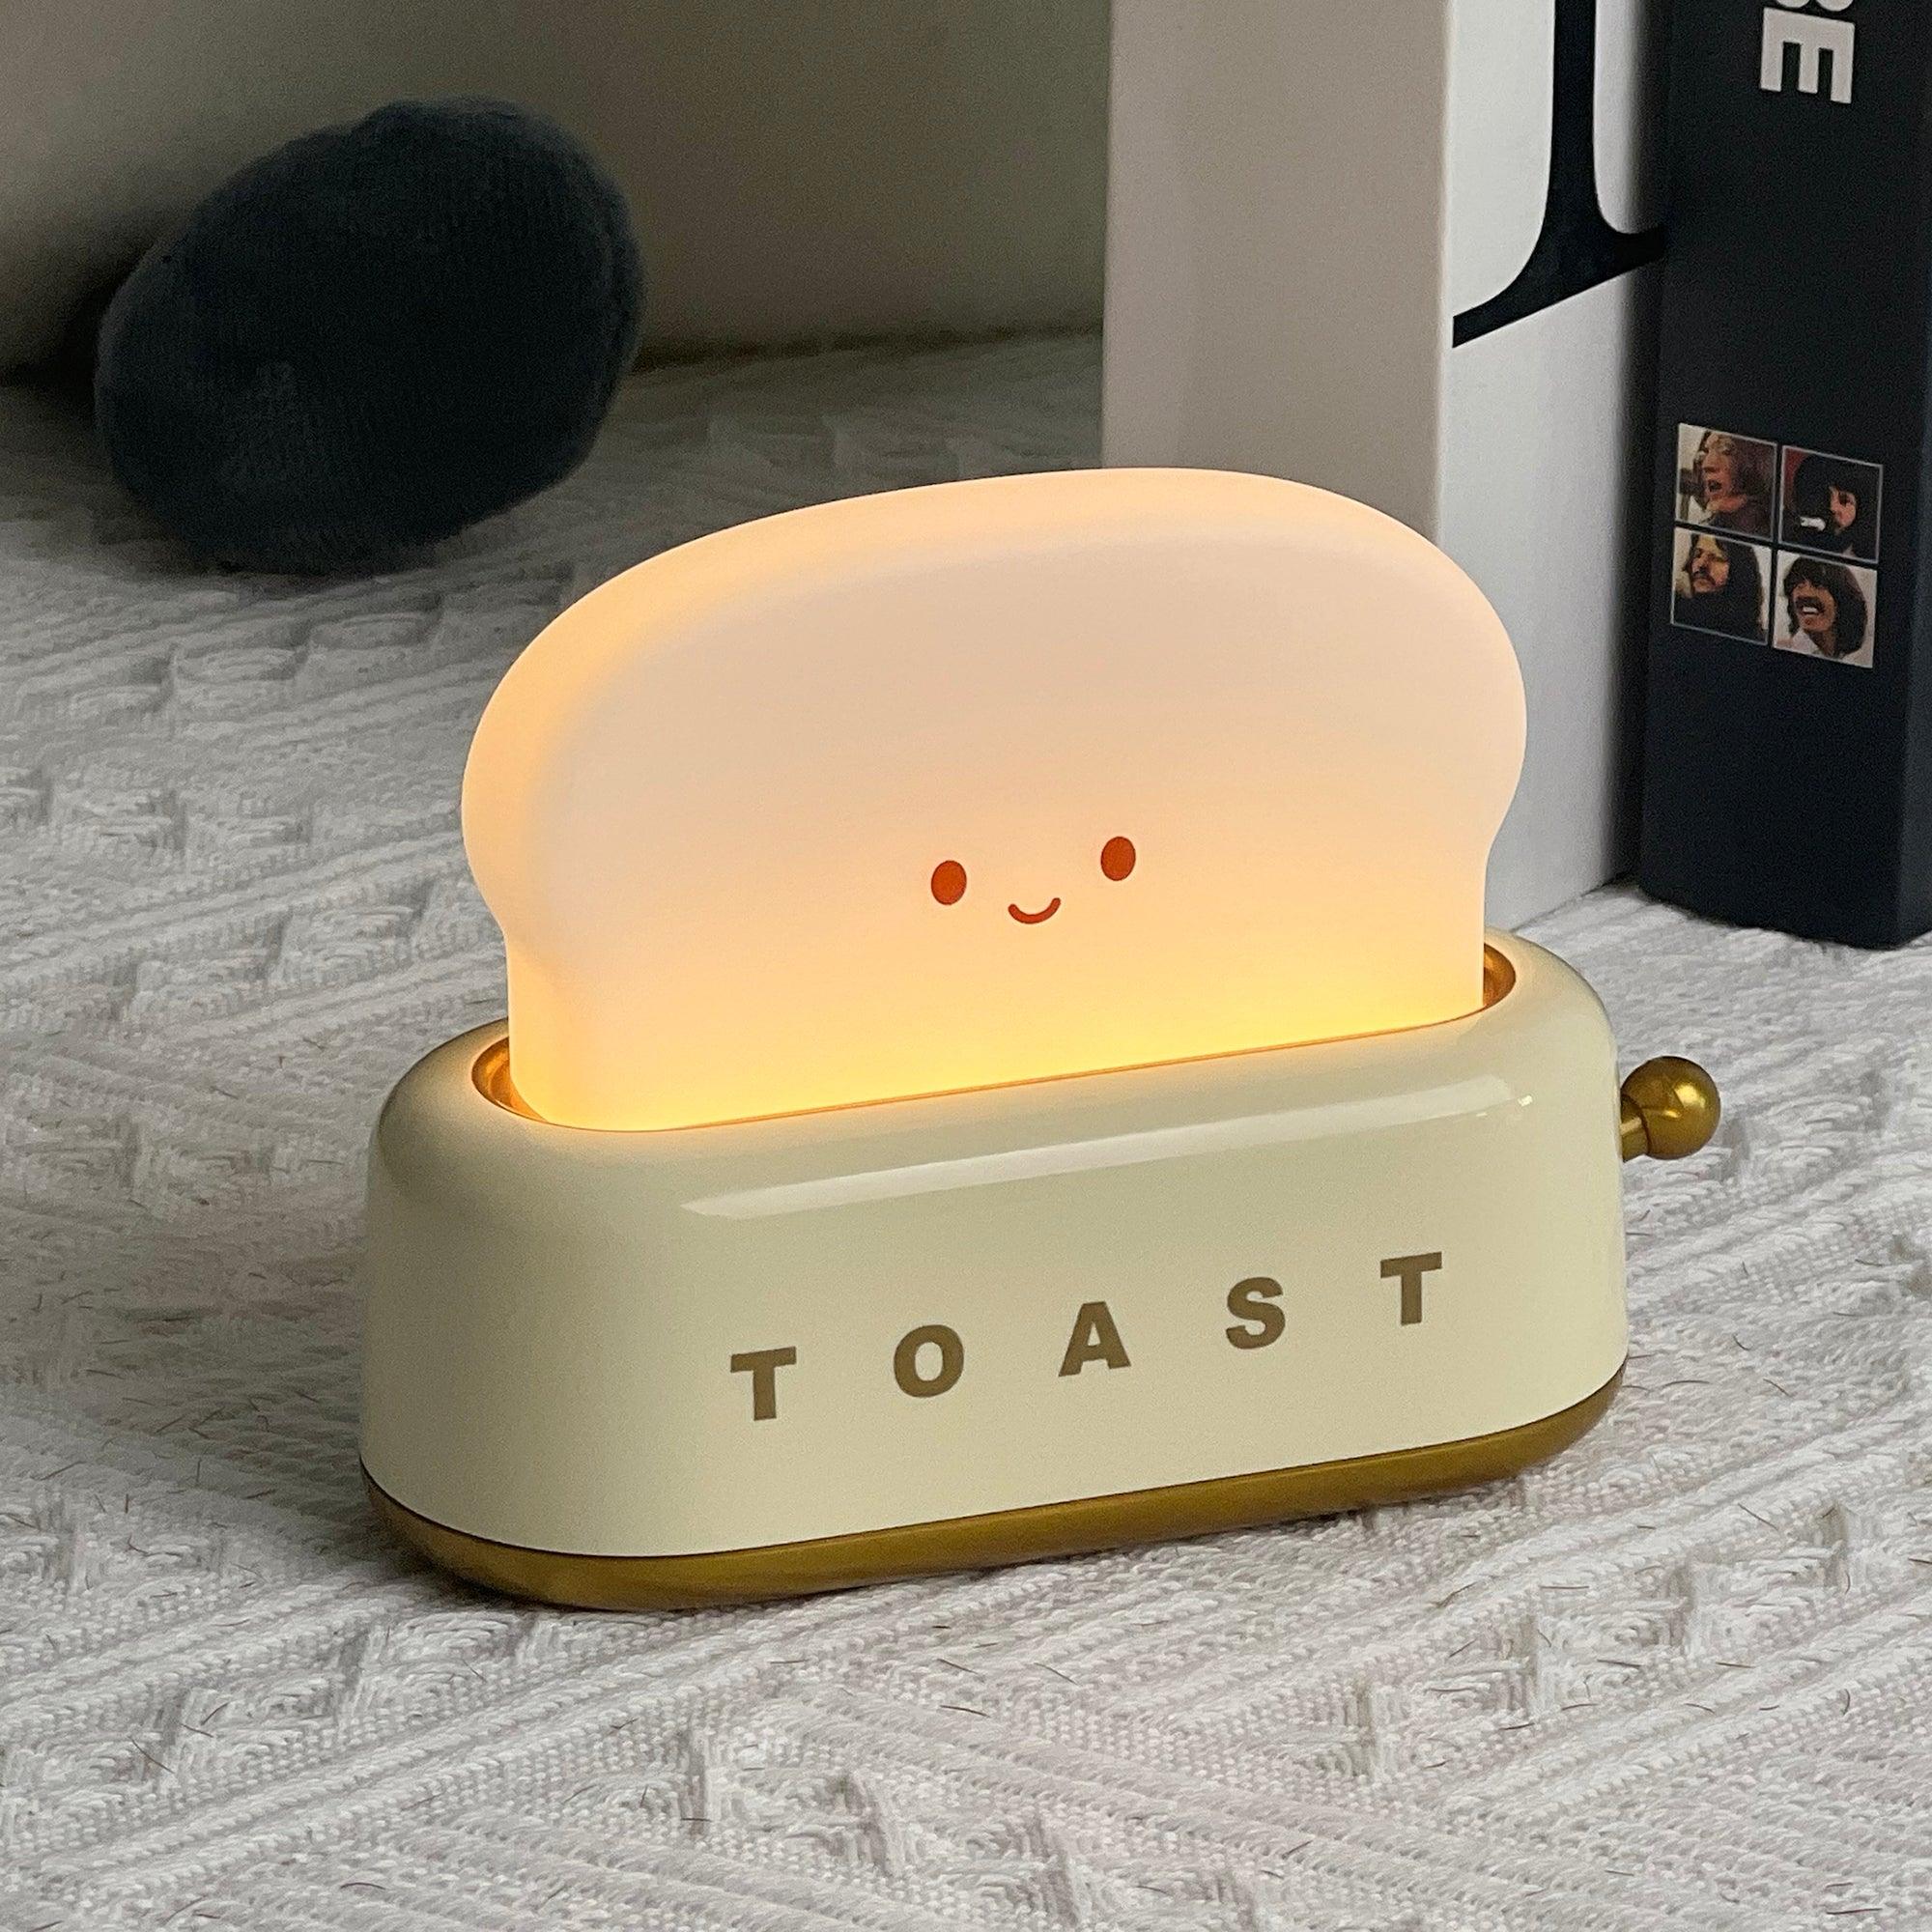 Toaster Table Lamp (built-in battery) 5.2″- 3.8″ - Docos